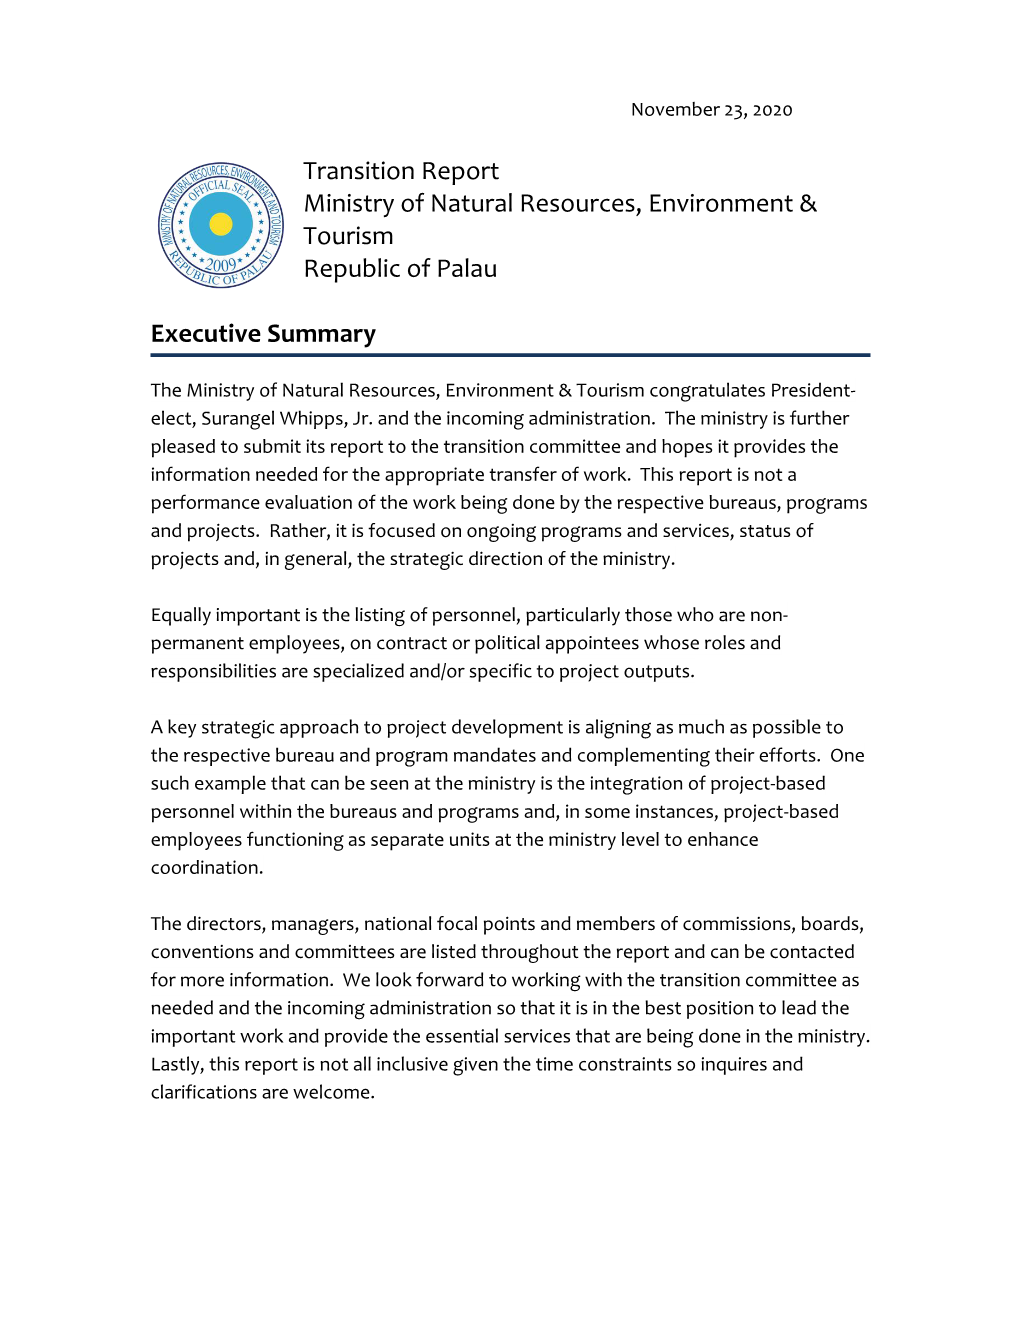 Transition Report Ministry of Natural Resources, Environment & Tourism